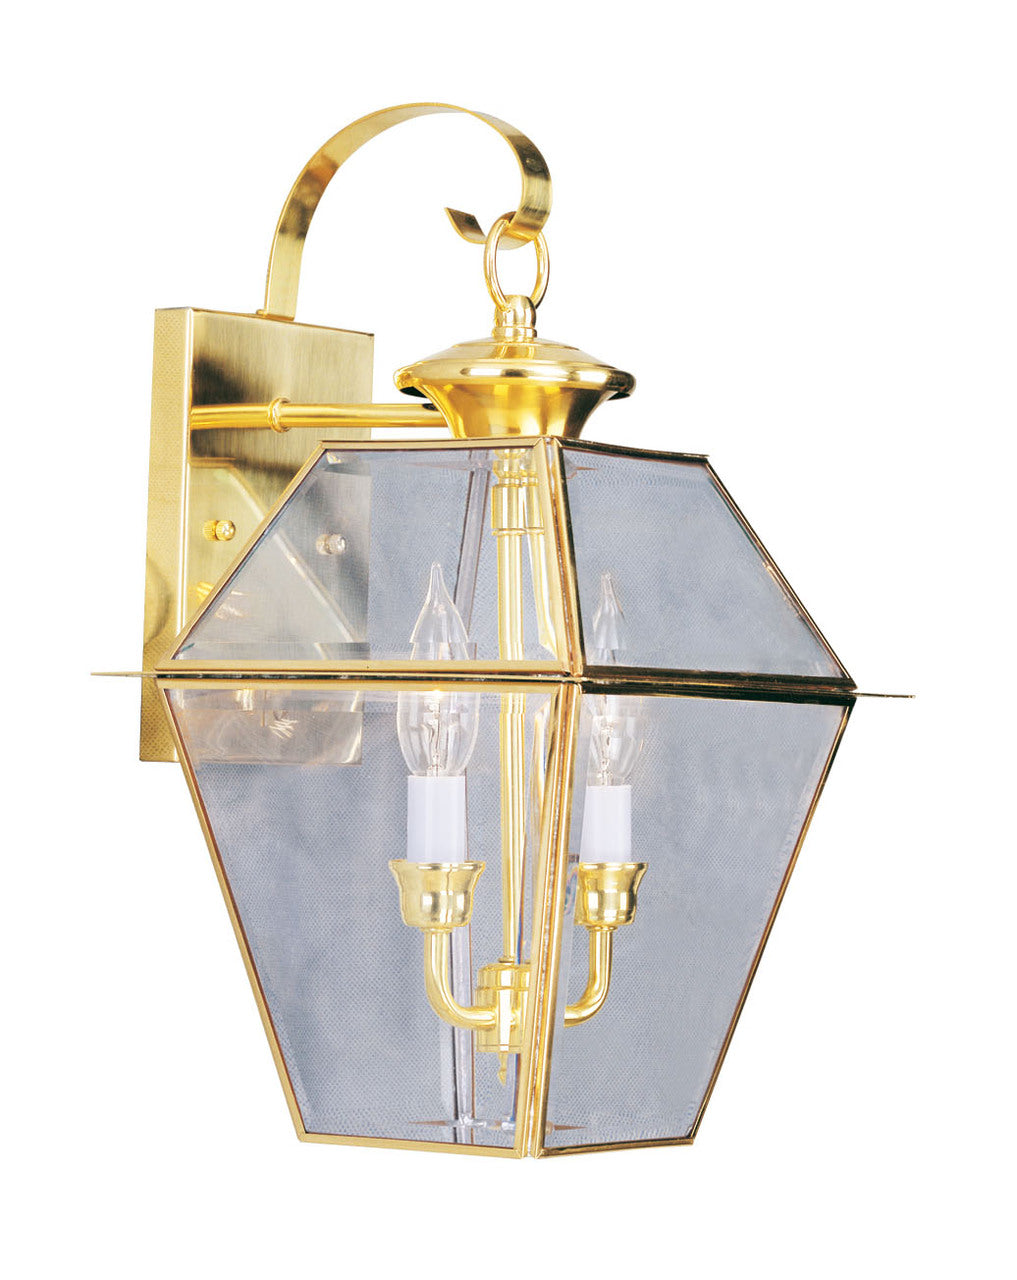 LIVEX Lighting 2281-02 Westover Outdoor Wall Lantern in Polished Brass (2 Light)